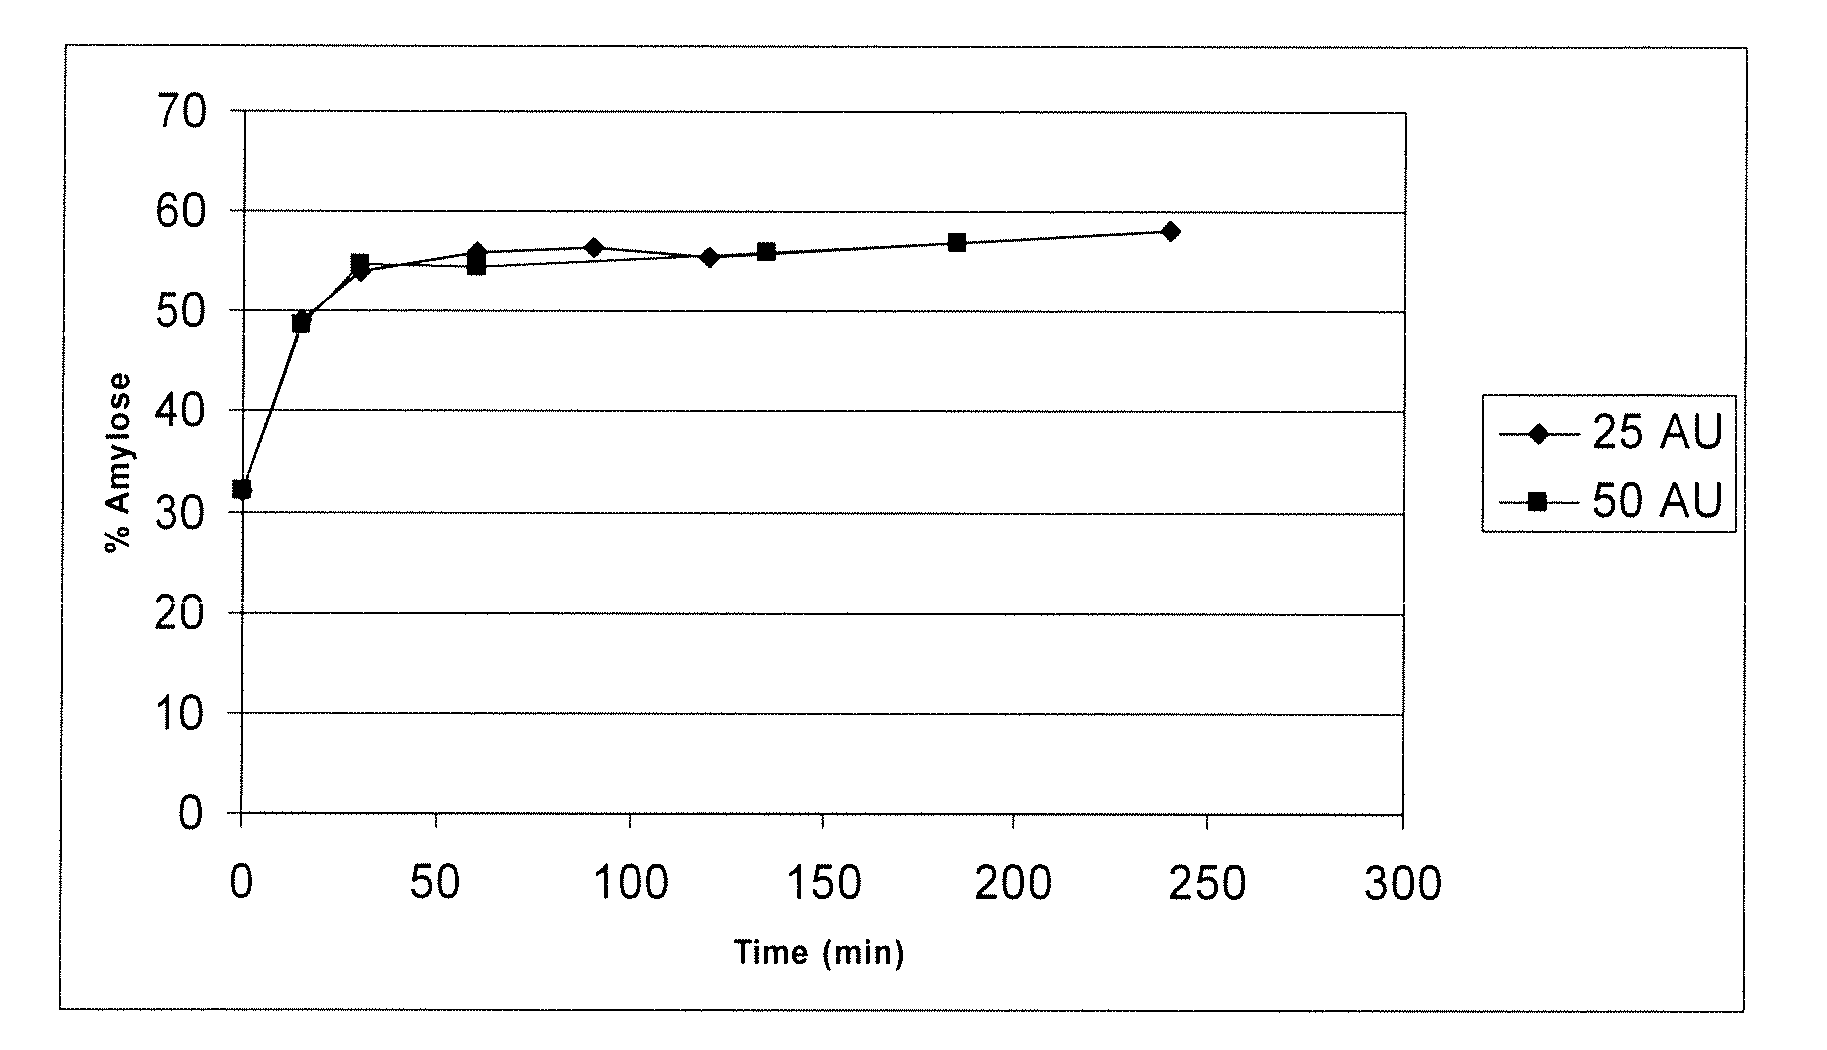 Thermoplastic Starch Formed from an Enzymatically Debranched Starch